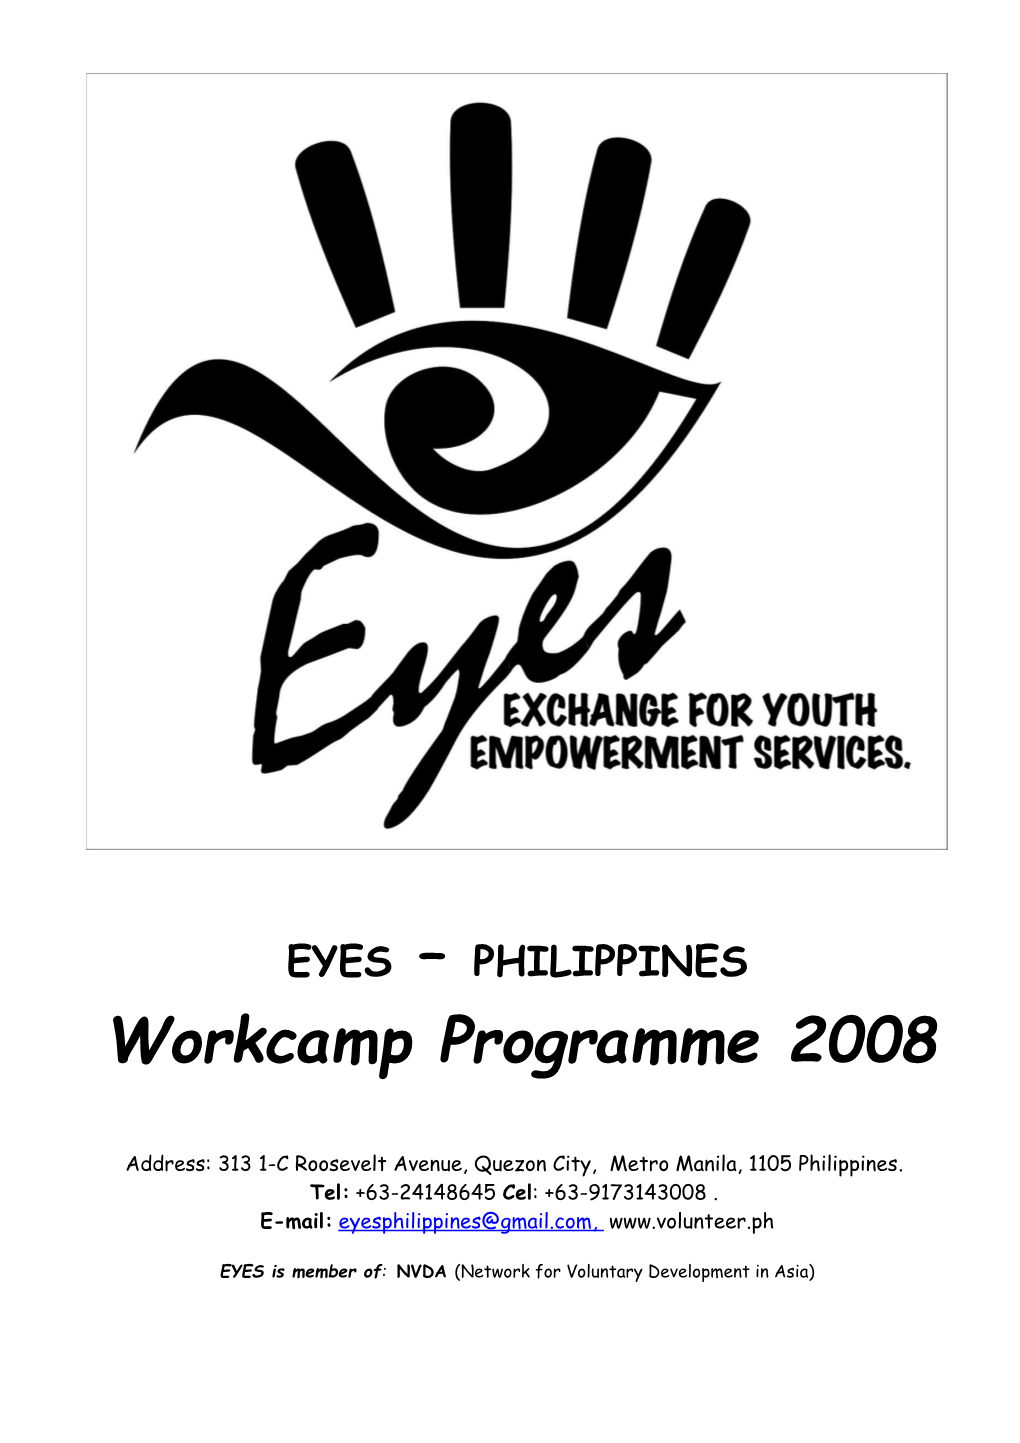 Exchange for Youth Empowerment Service